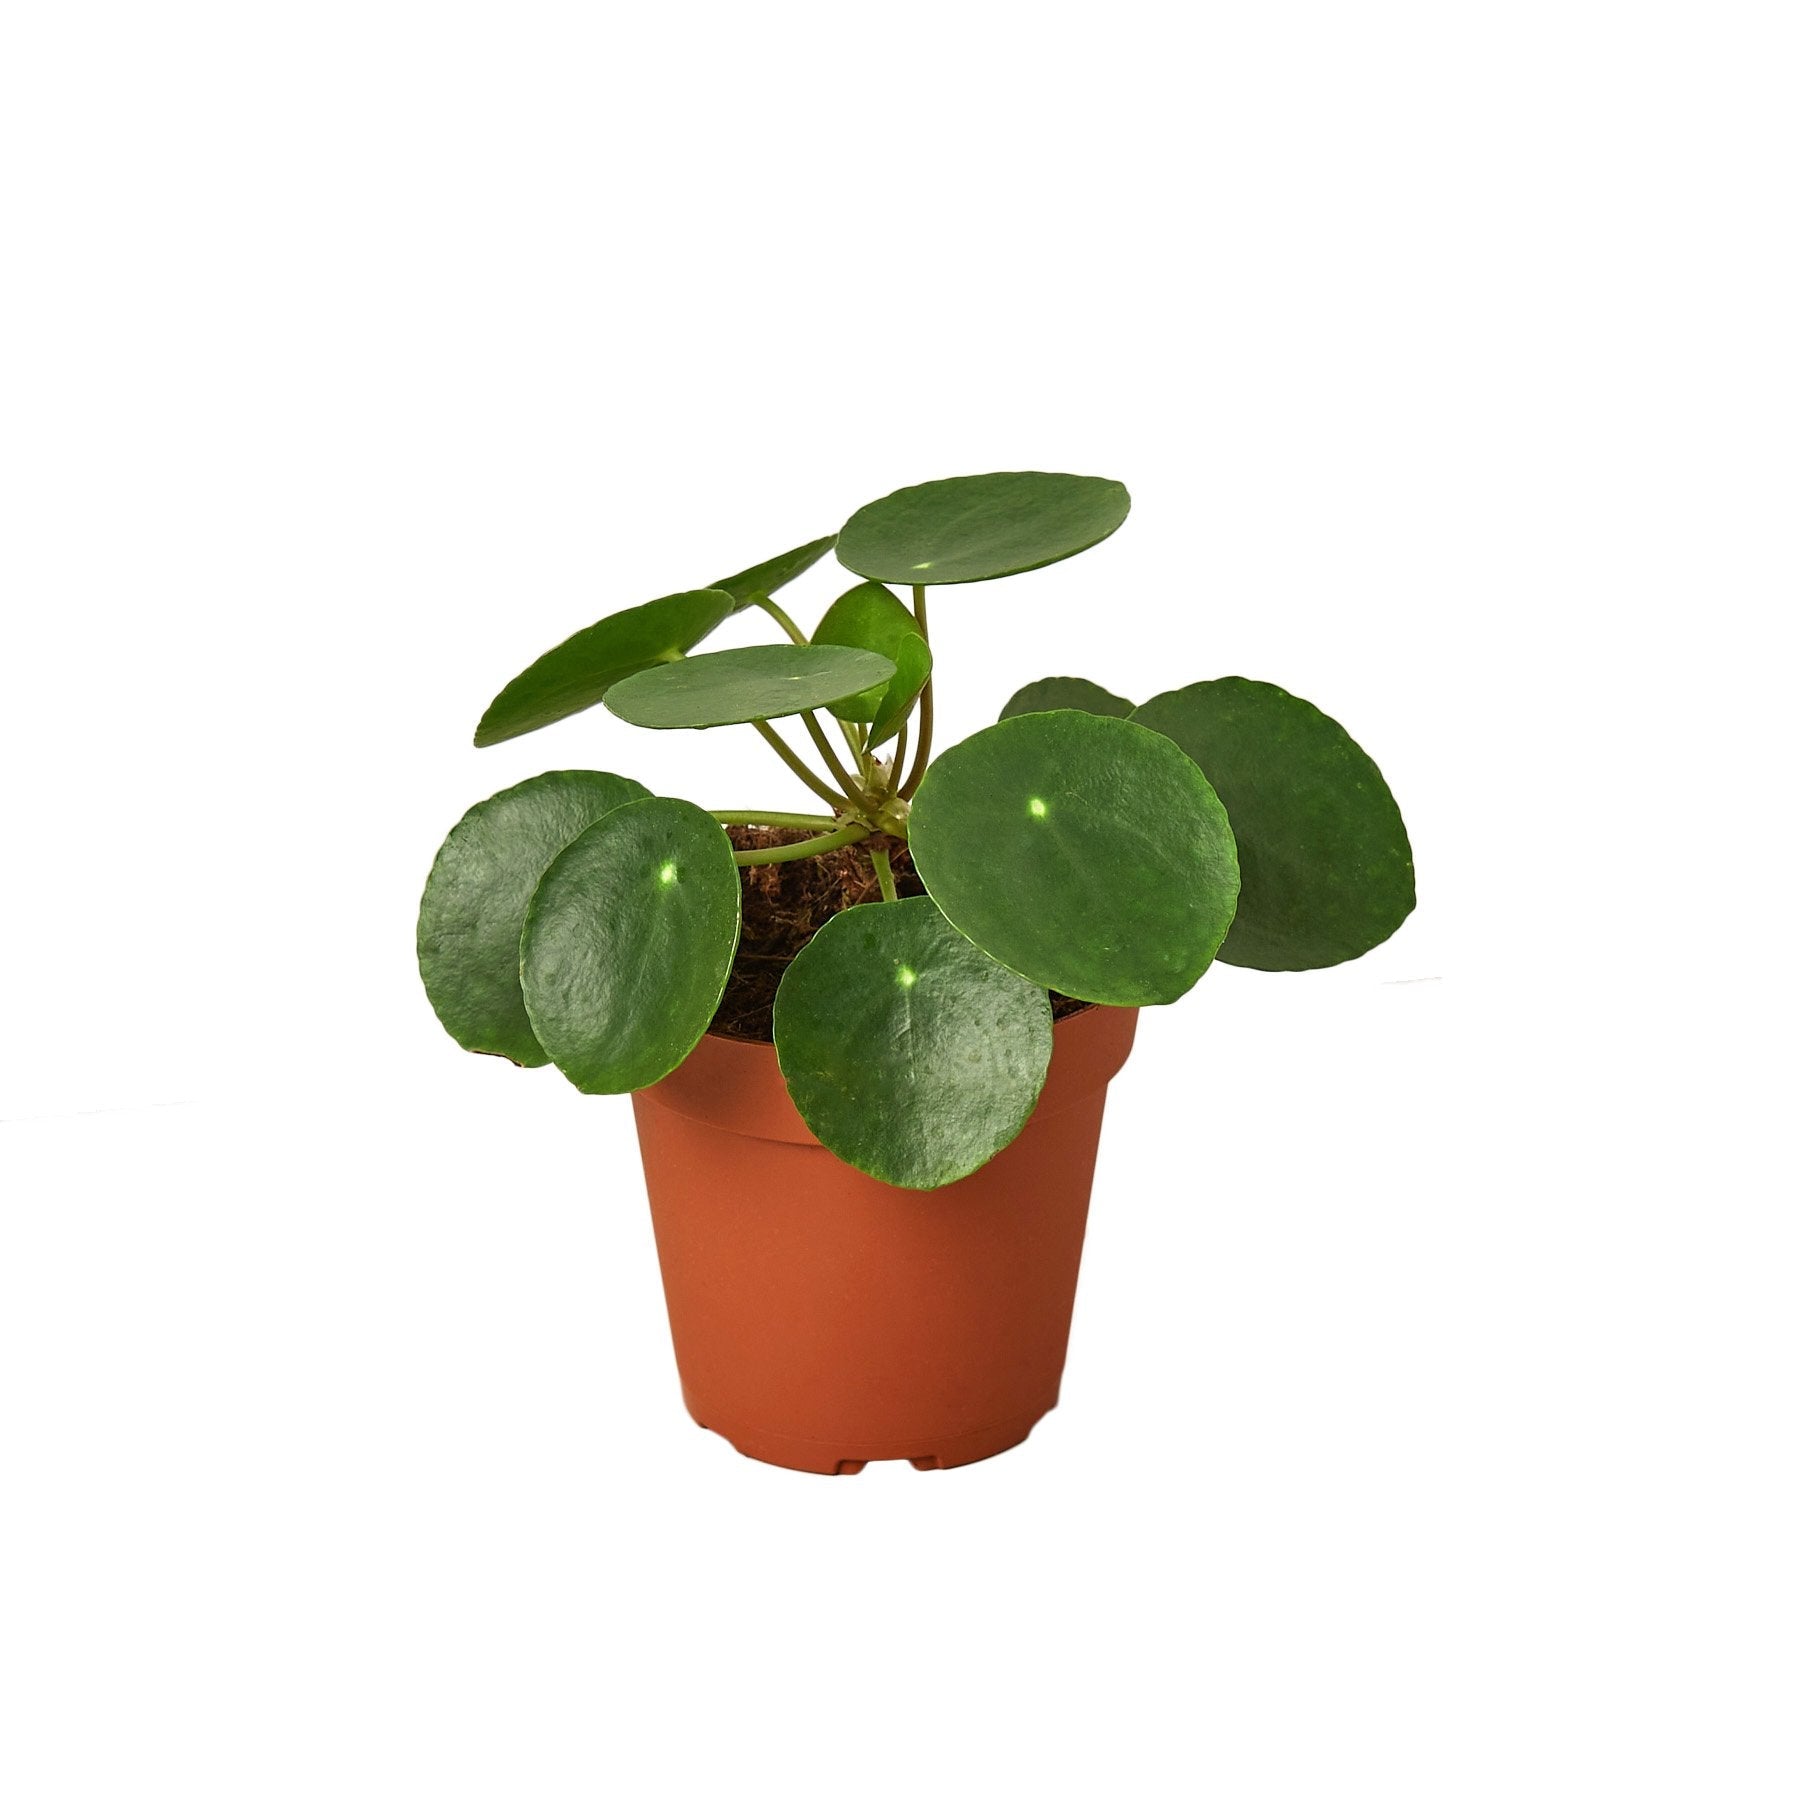 Pilea Peperomioides 'Chinese Money' - 4" Pot - NURSERY POT Questions & Answers